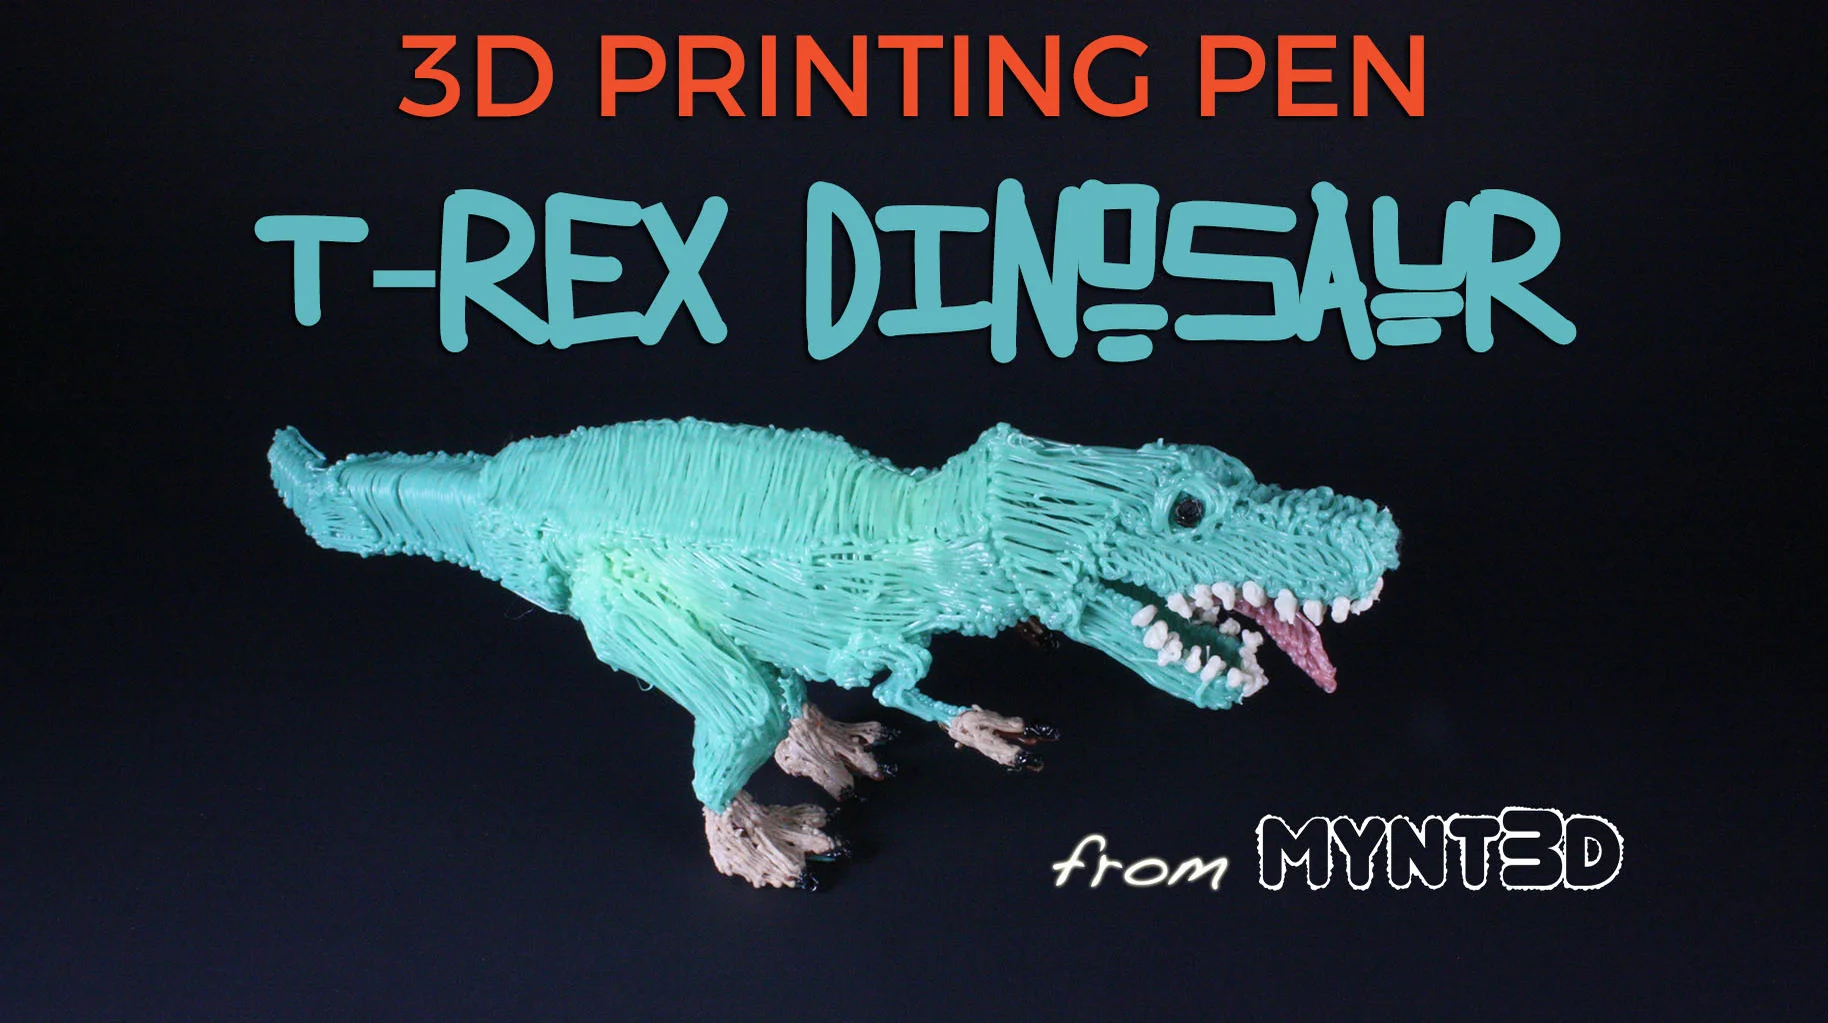 MYNT3D User Guide to 3D Pen Care and Troubleshooting on Vimeo